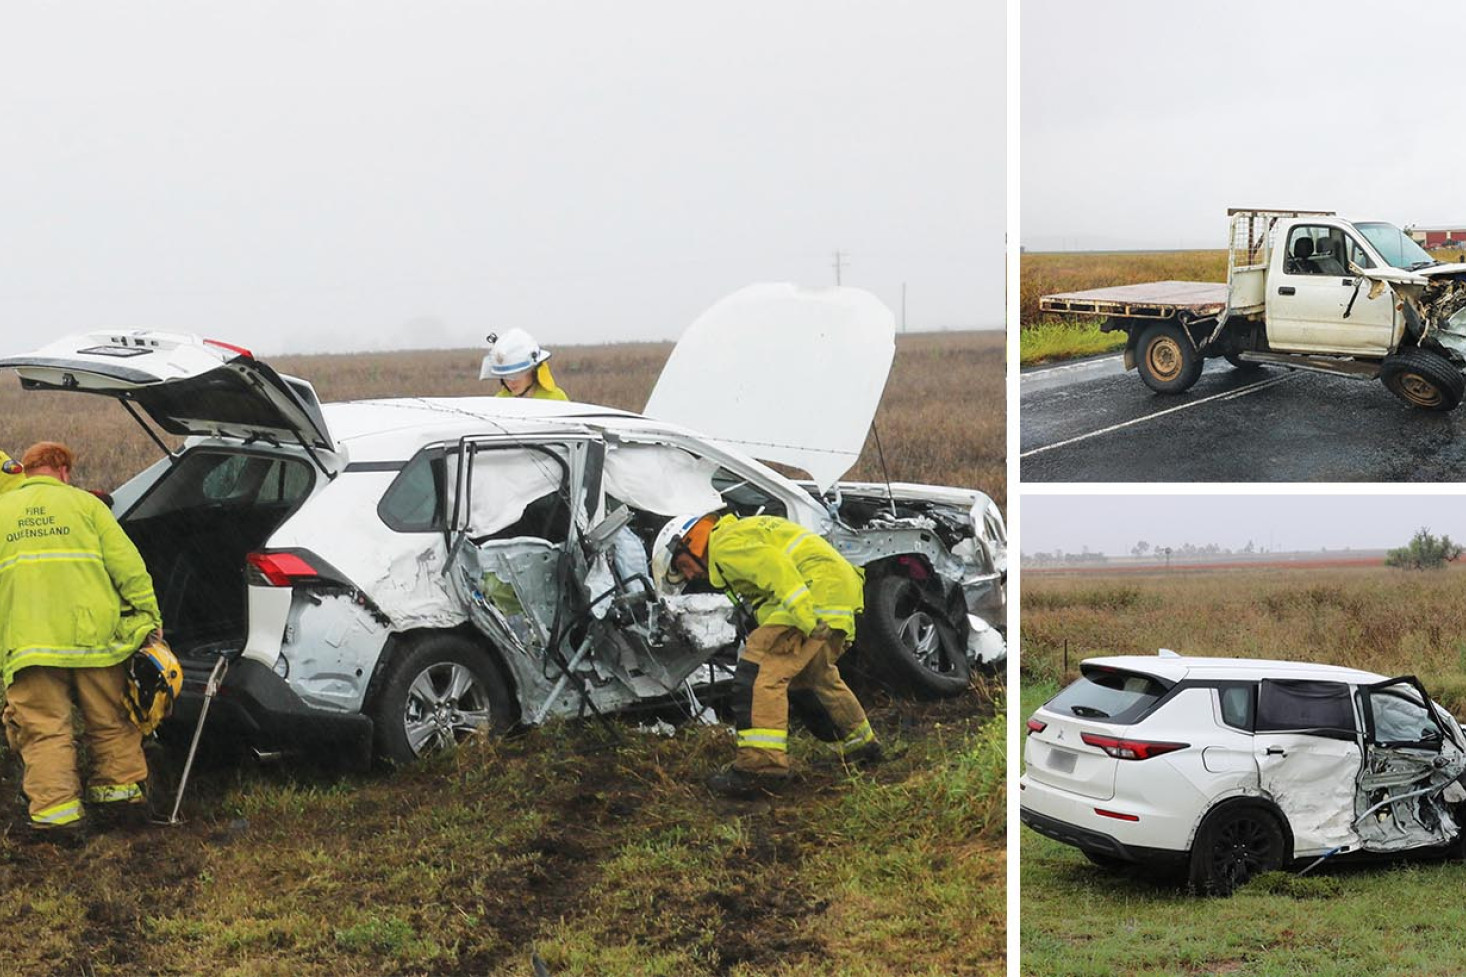 The three vehicles involved in the crash.